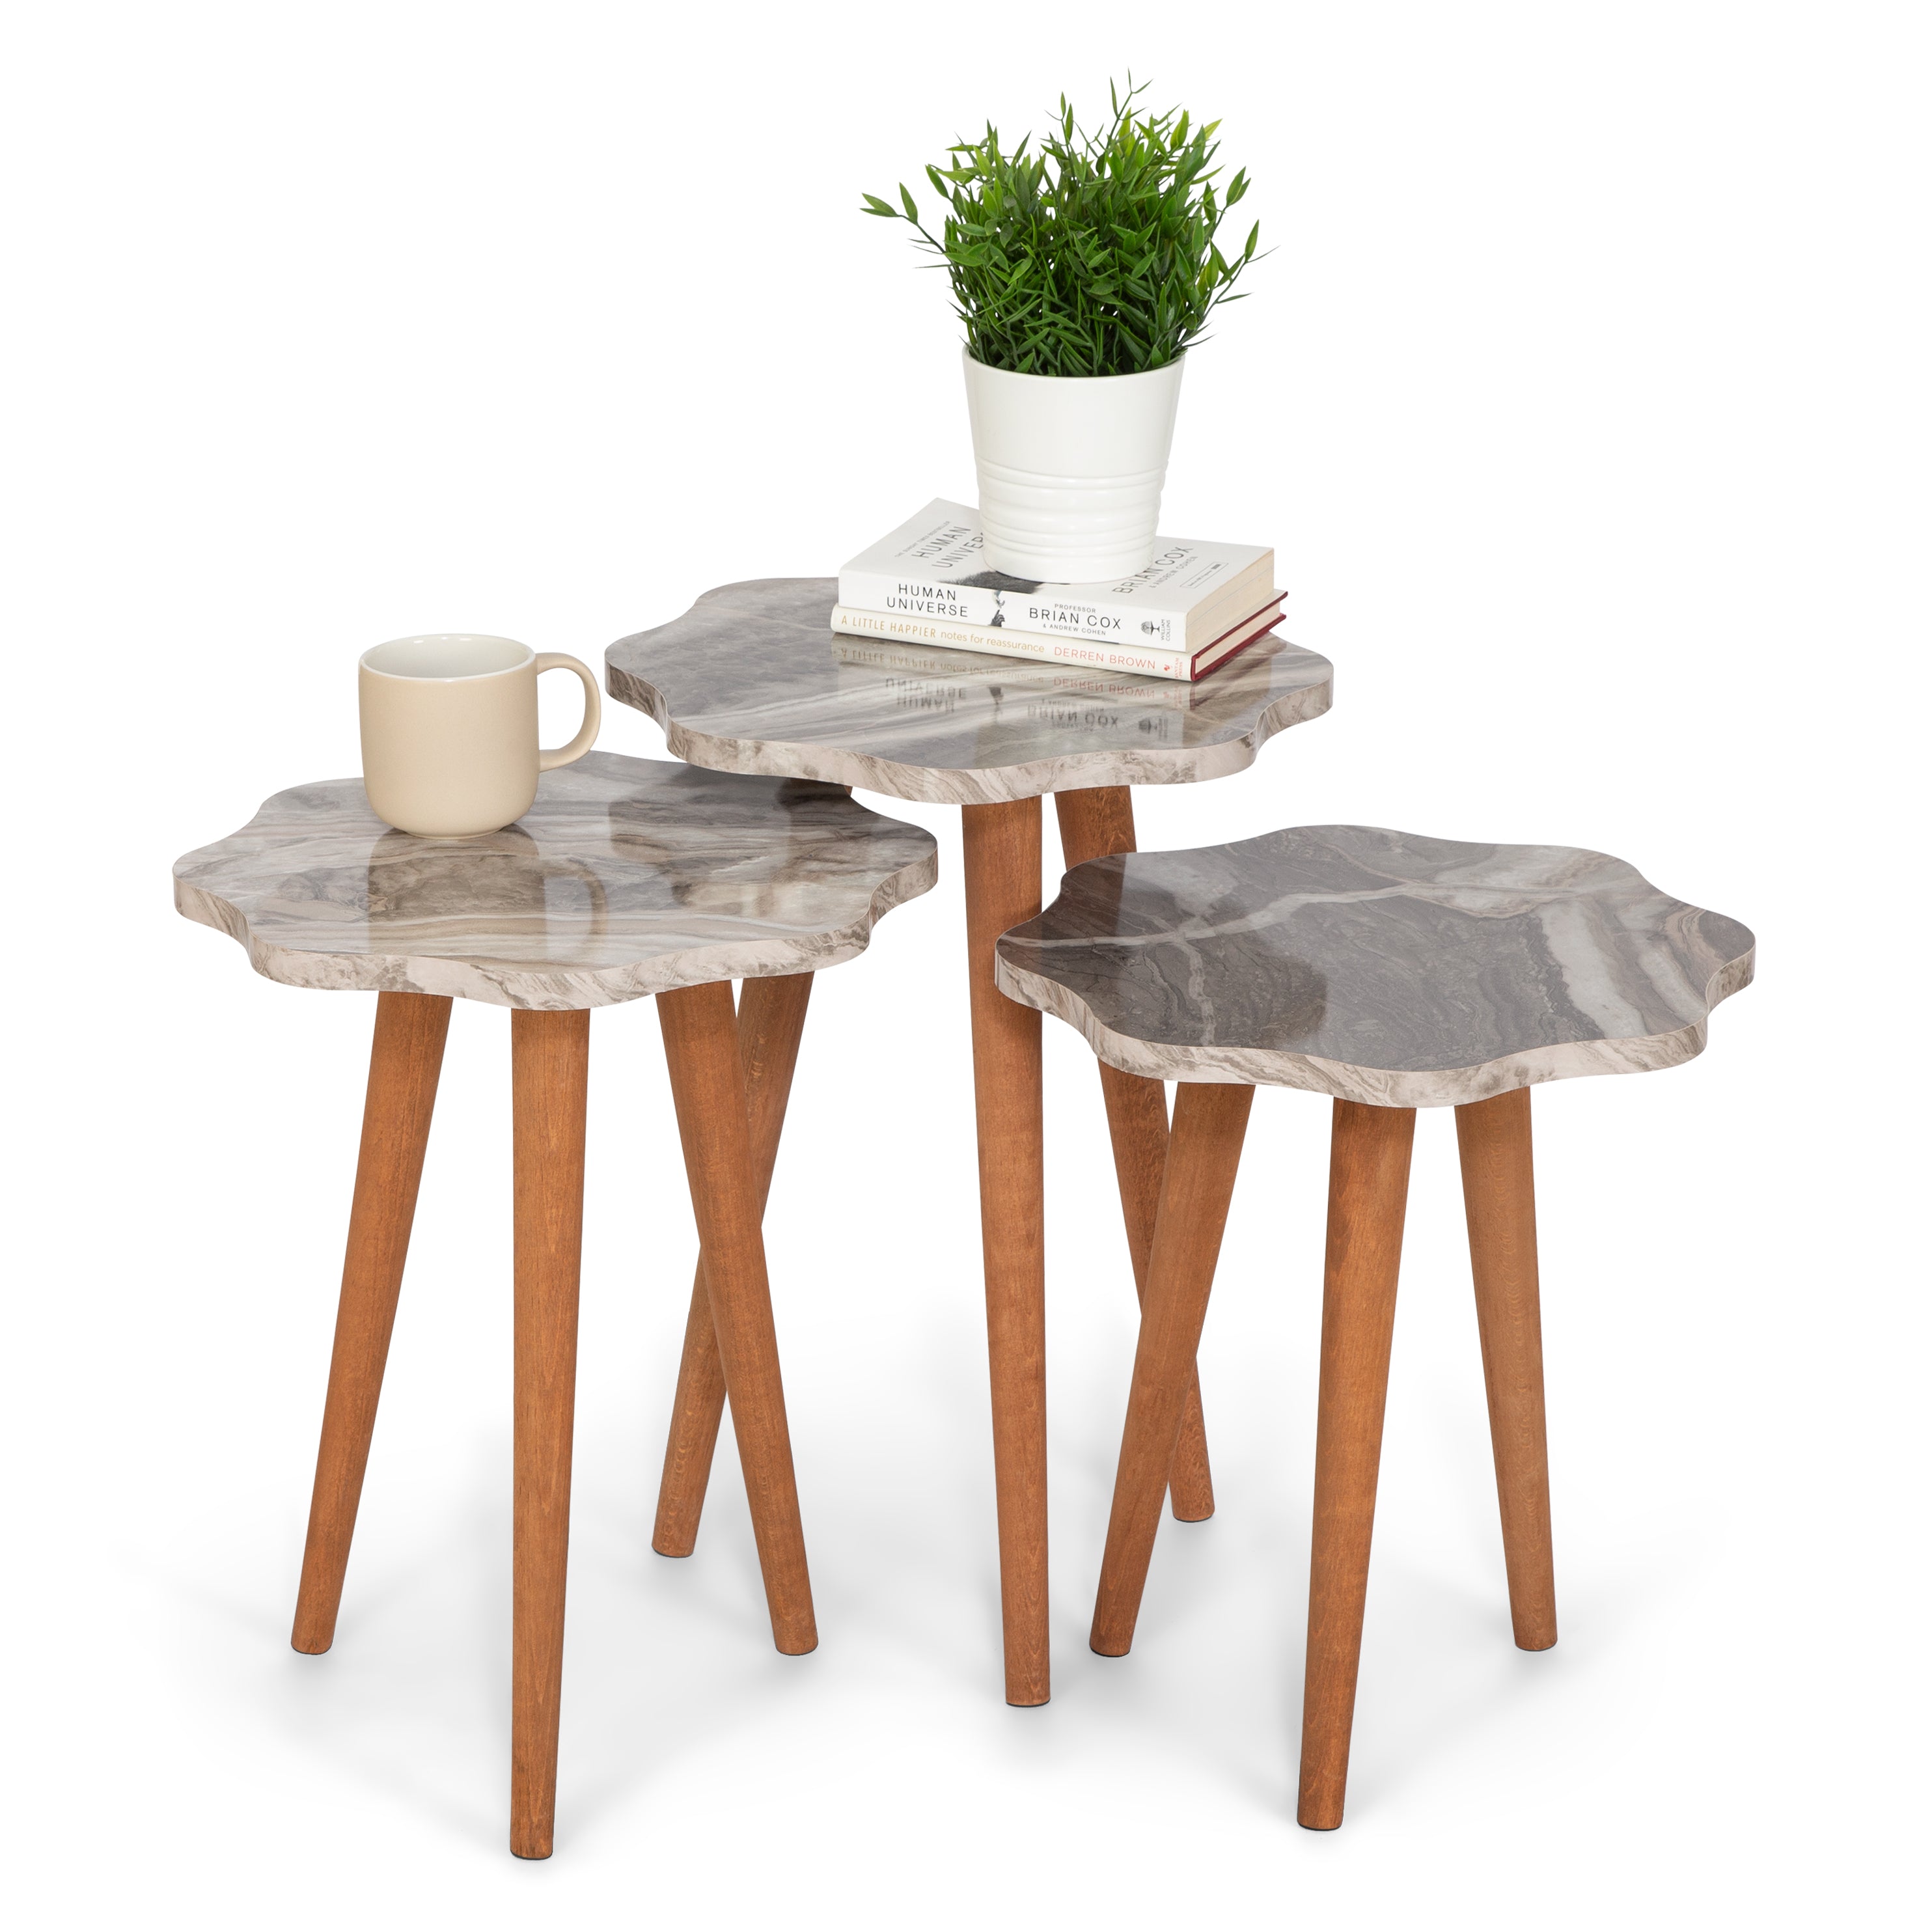 Daisy Set Of 3 Side Tables - Grey Marble & Wood